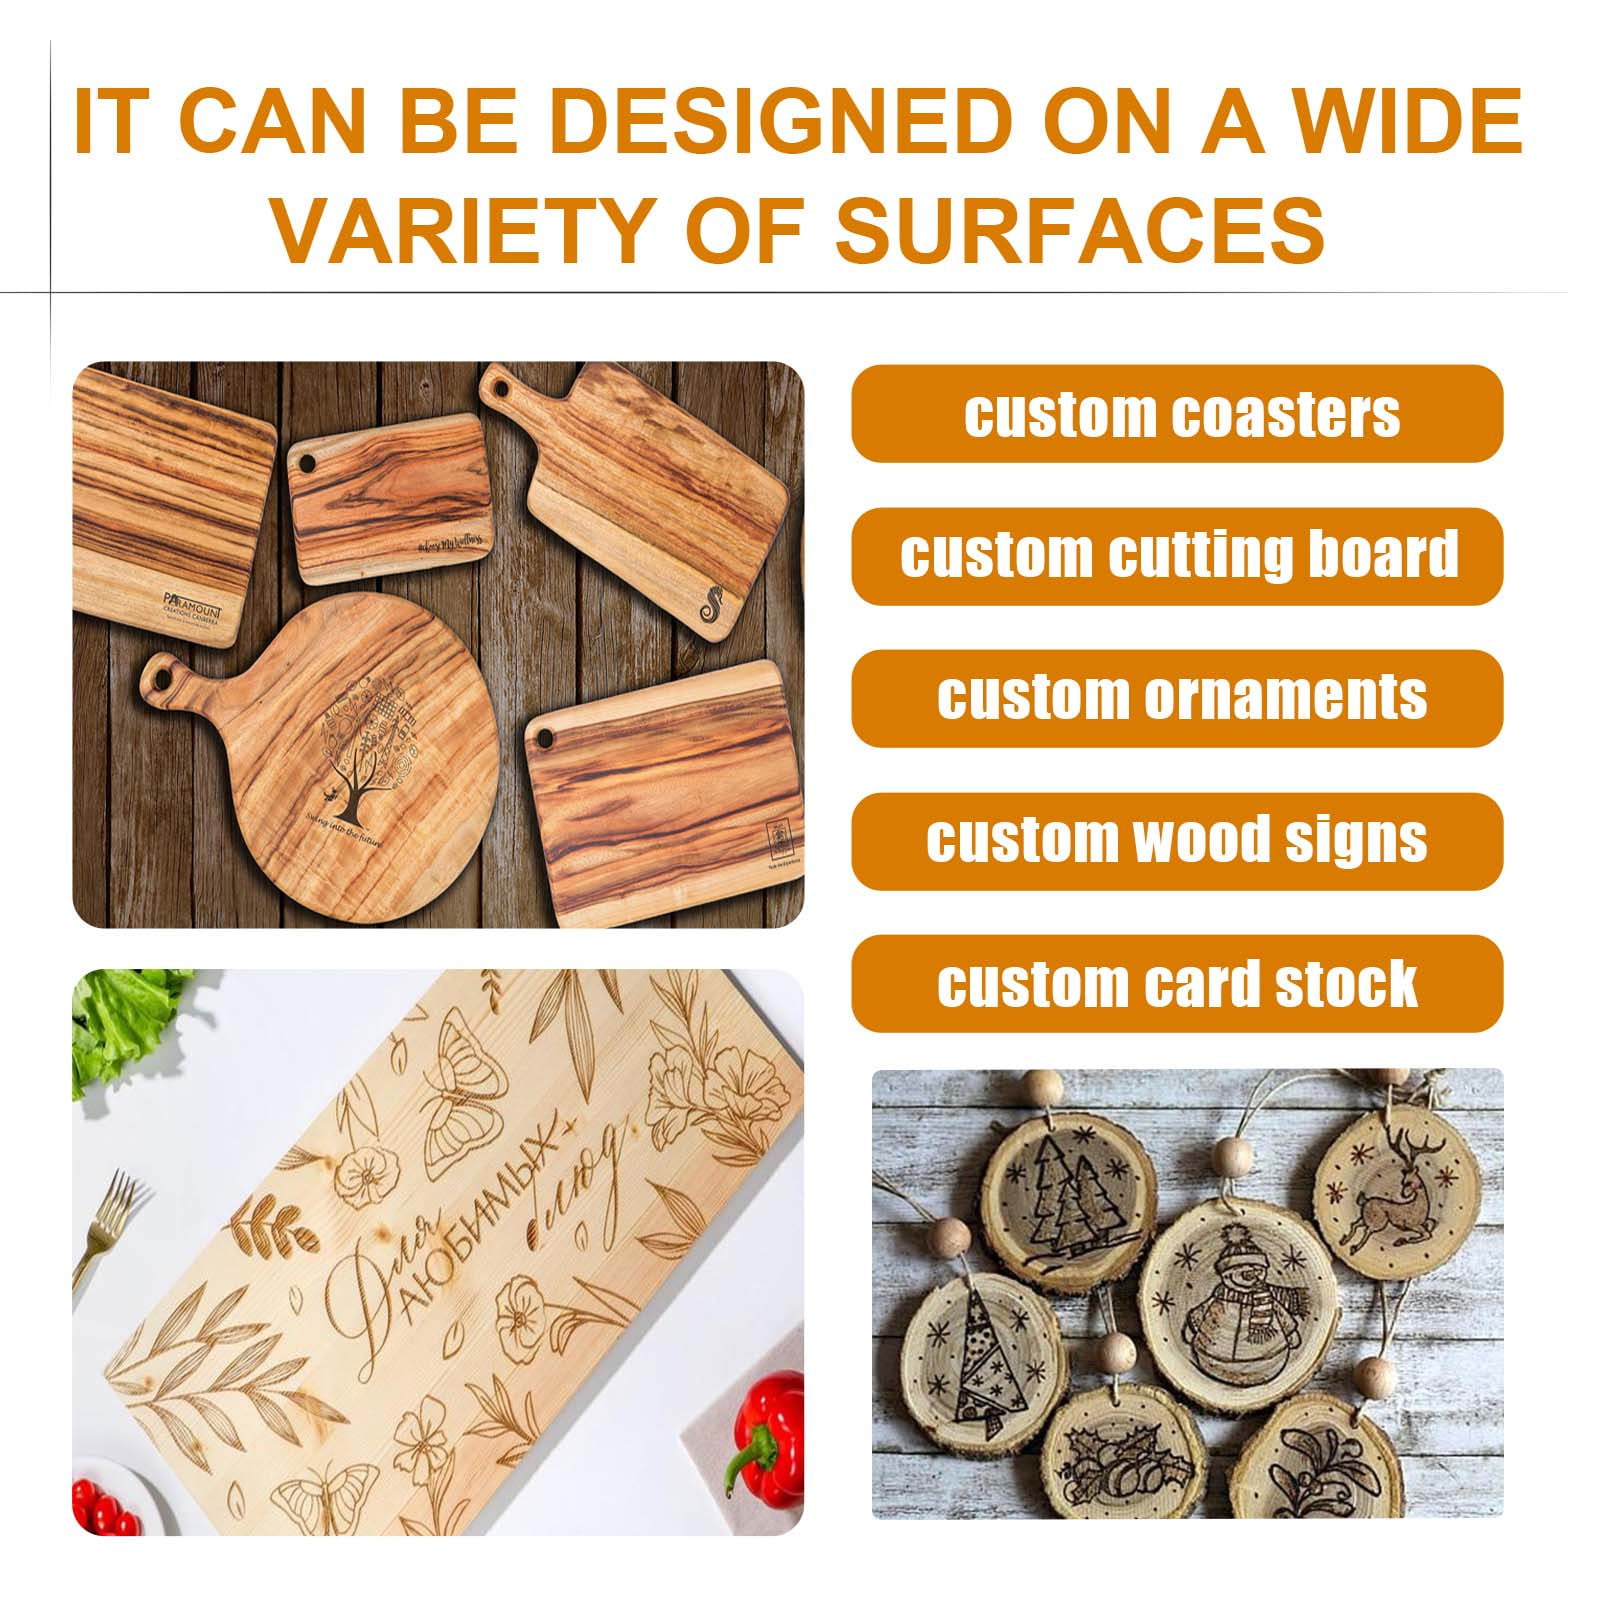 Torch Paste - The Original Wood Burning Paste | Made in USA | Heat  Activated Non-Toxic Paste for Crafting & Stencil Wood Burning | Accurately  & Easily